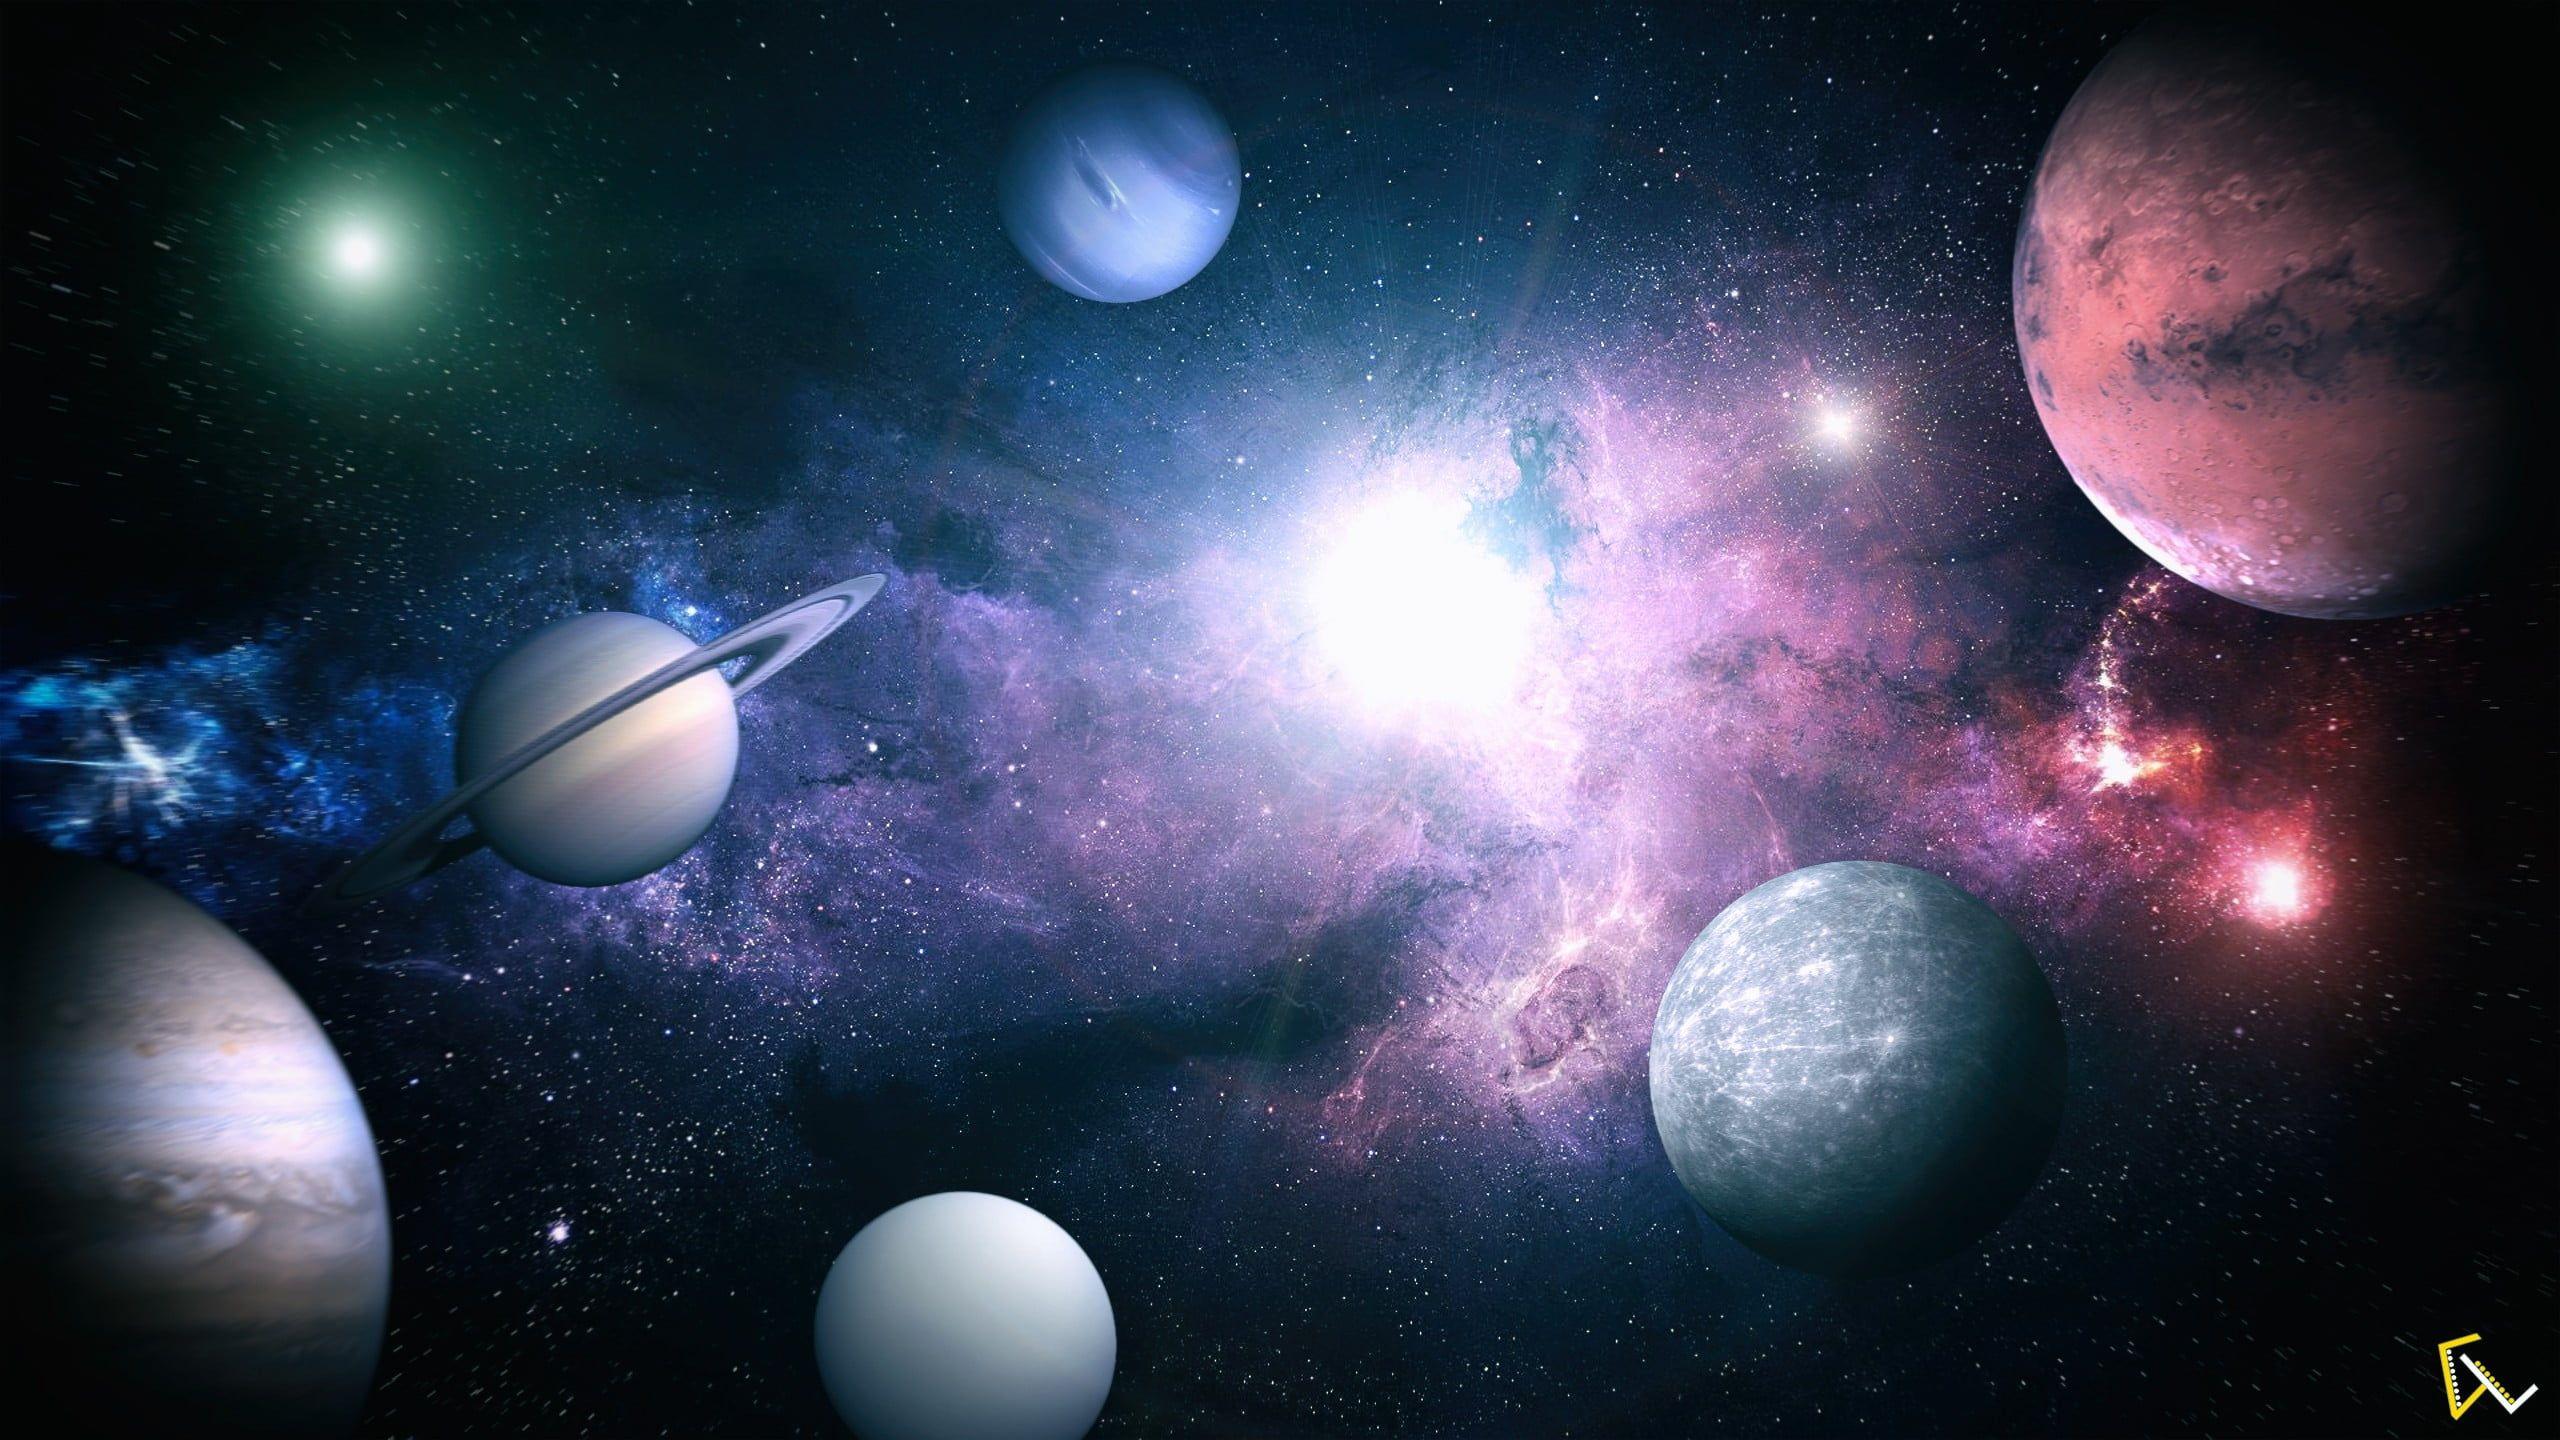 Planets And Solar System Hd Wallpaper 9877 Wallpapers13com Images